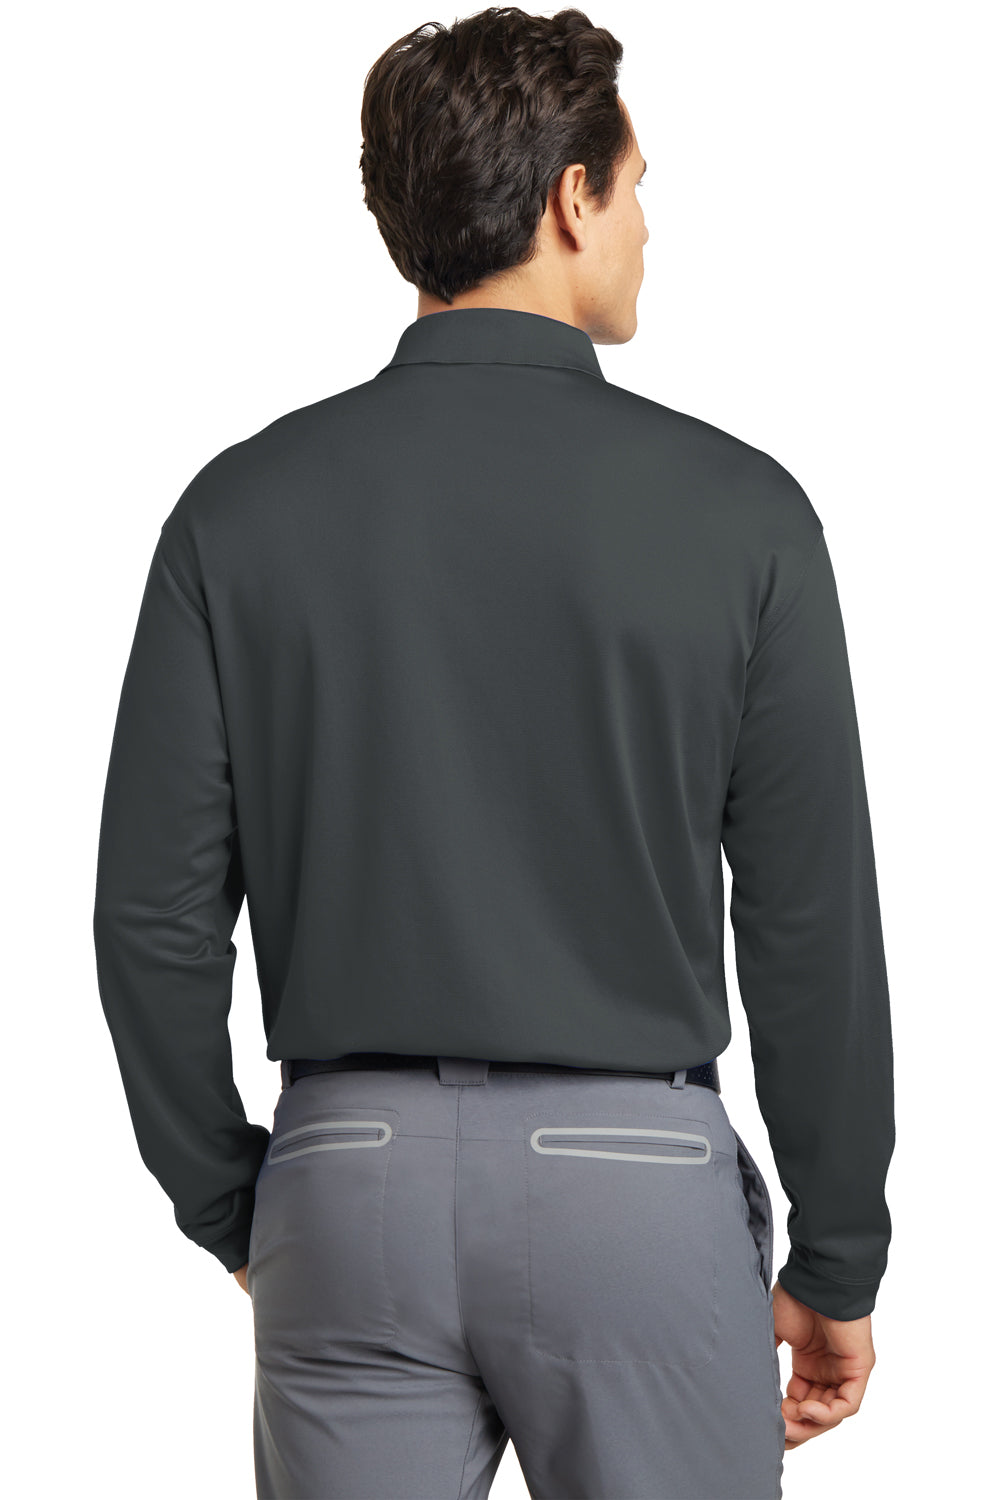 Nike 466364/604940 Mens Stretch Tech Dri-Fit Moisture Wicking Long Sleeve Polo Shirt Anthracite Grey Model Back